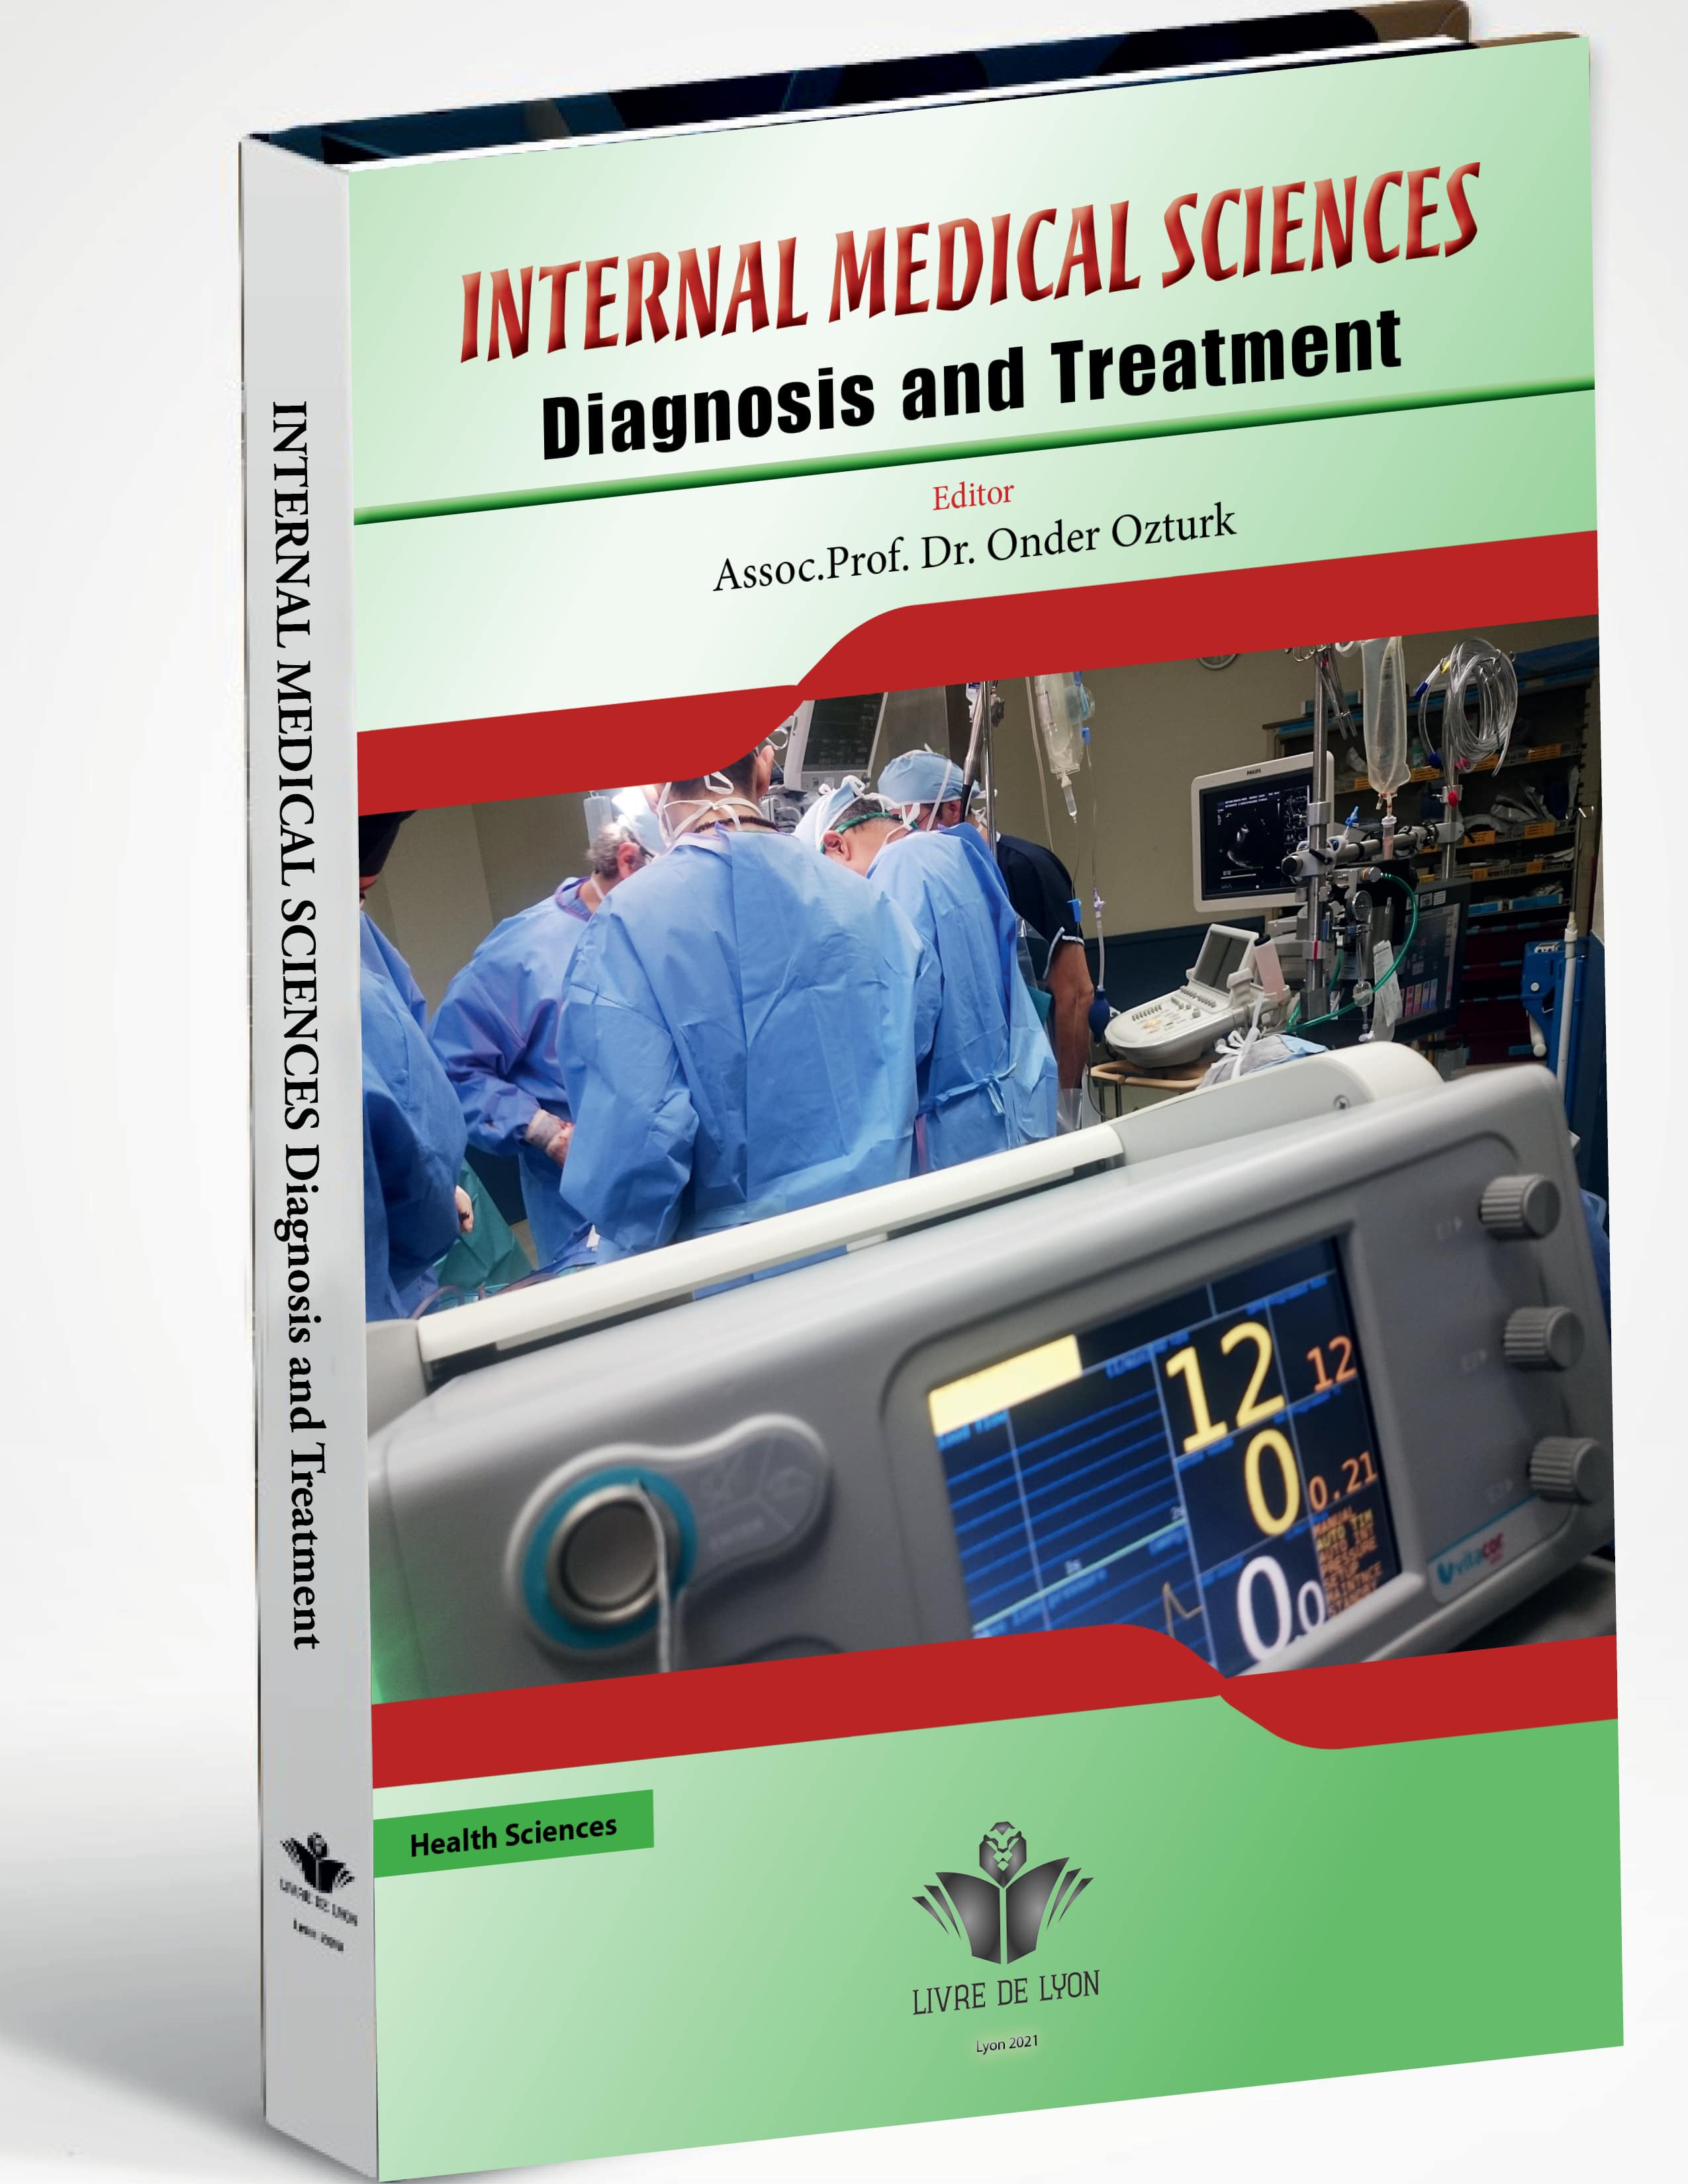 Internal Medical Sciences Diagnosis and Treatment